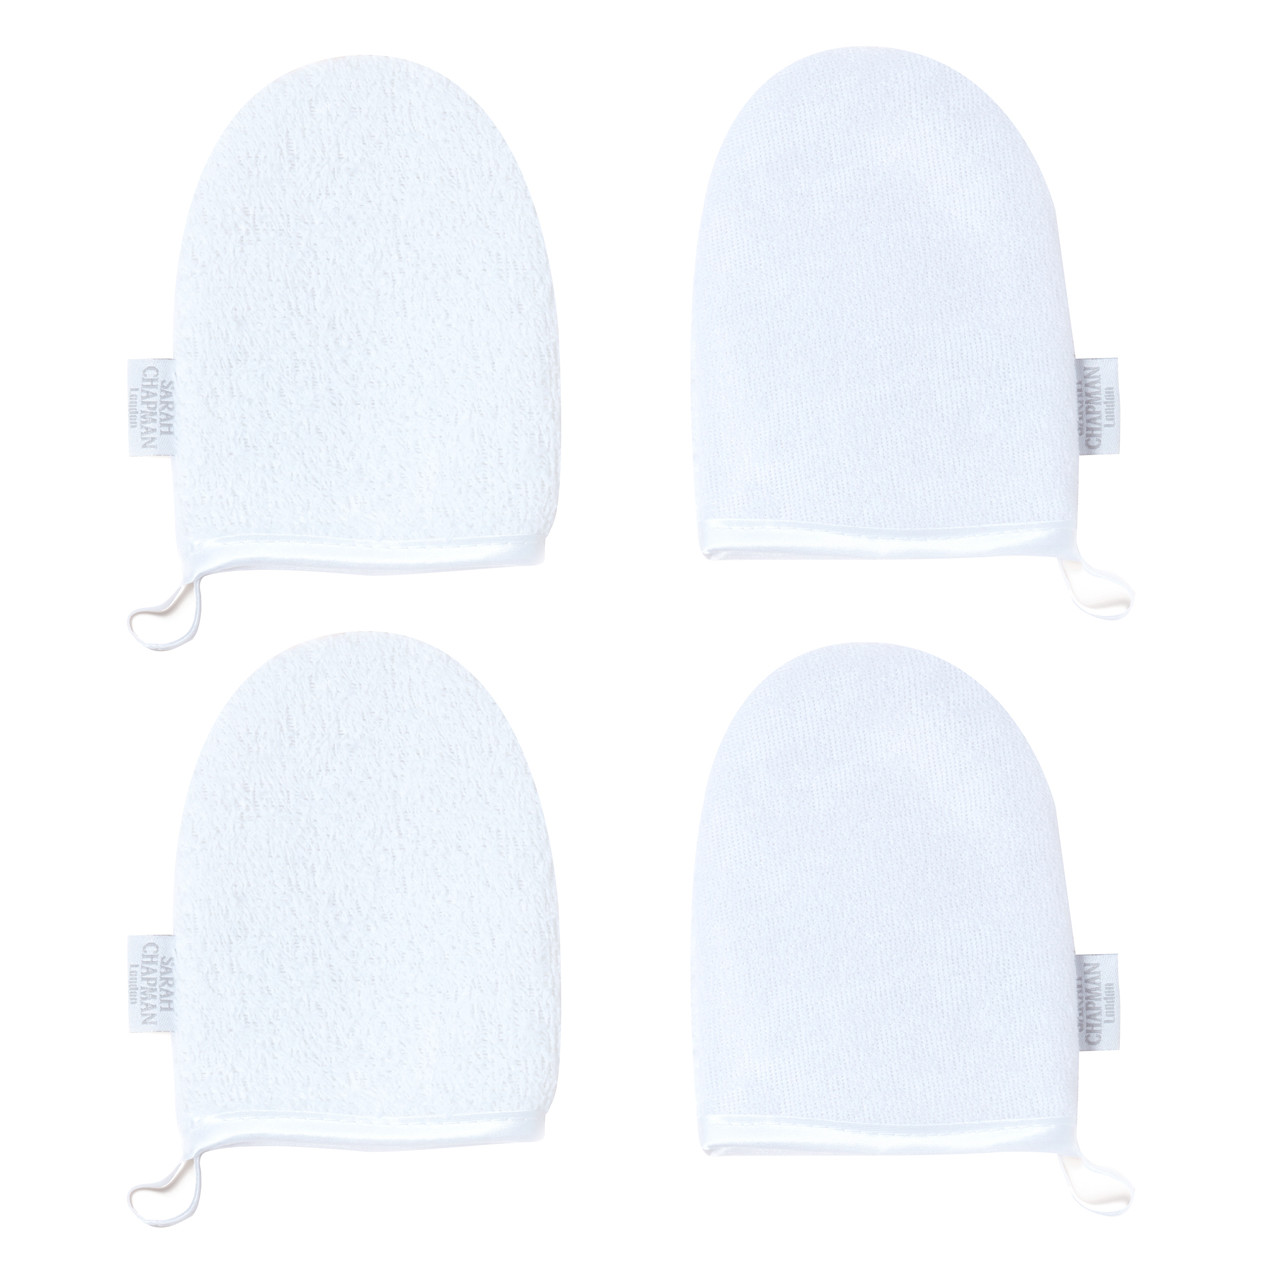 Sarah Chapman Professional Cleansing Mitts, 4 Mitts - VictoriaHealth